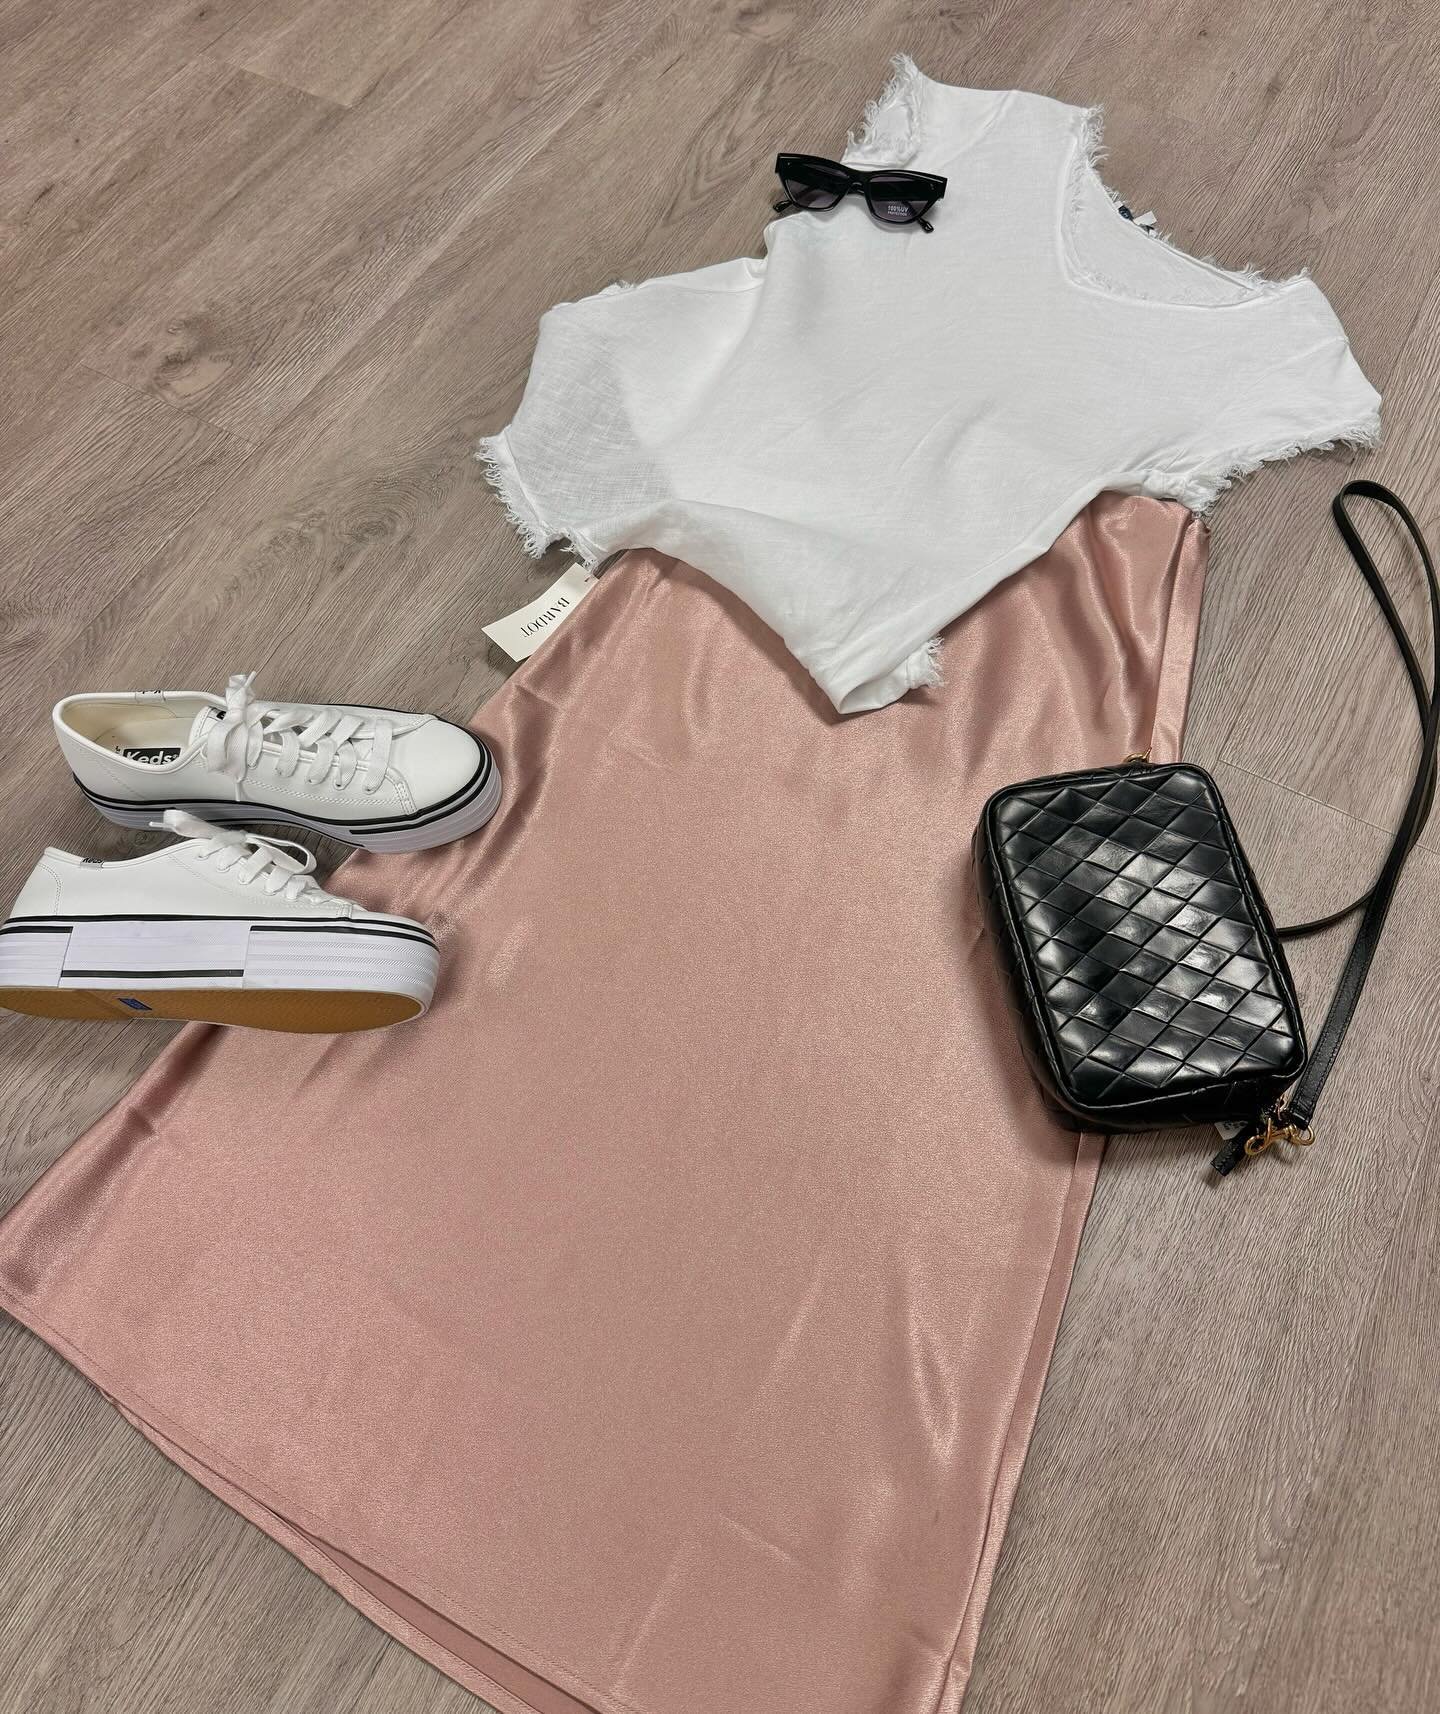 🤍💕Simple and sweet! Lots of satin and linen in store today💕🤍
.
.
.
#wildroseconsignment #downtownguelph #shoplocal #shopsustainable #womenownedbusiness